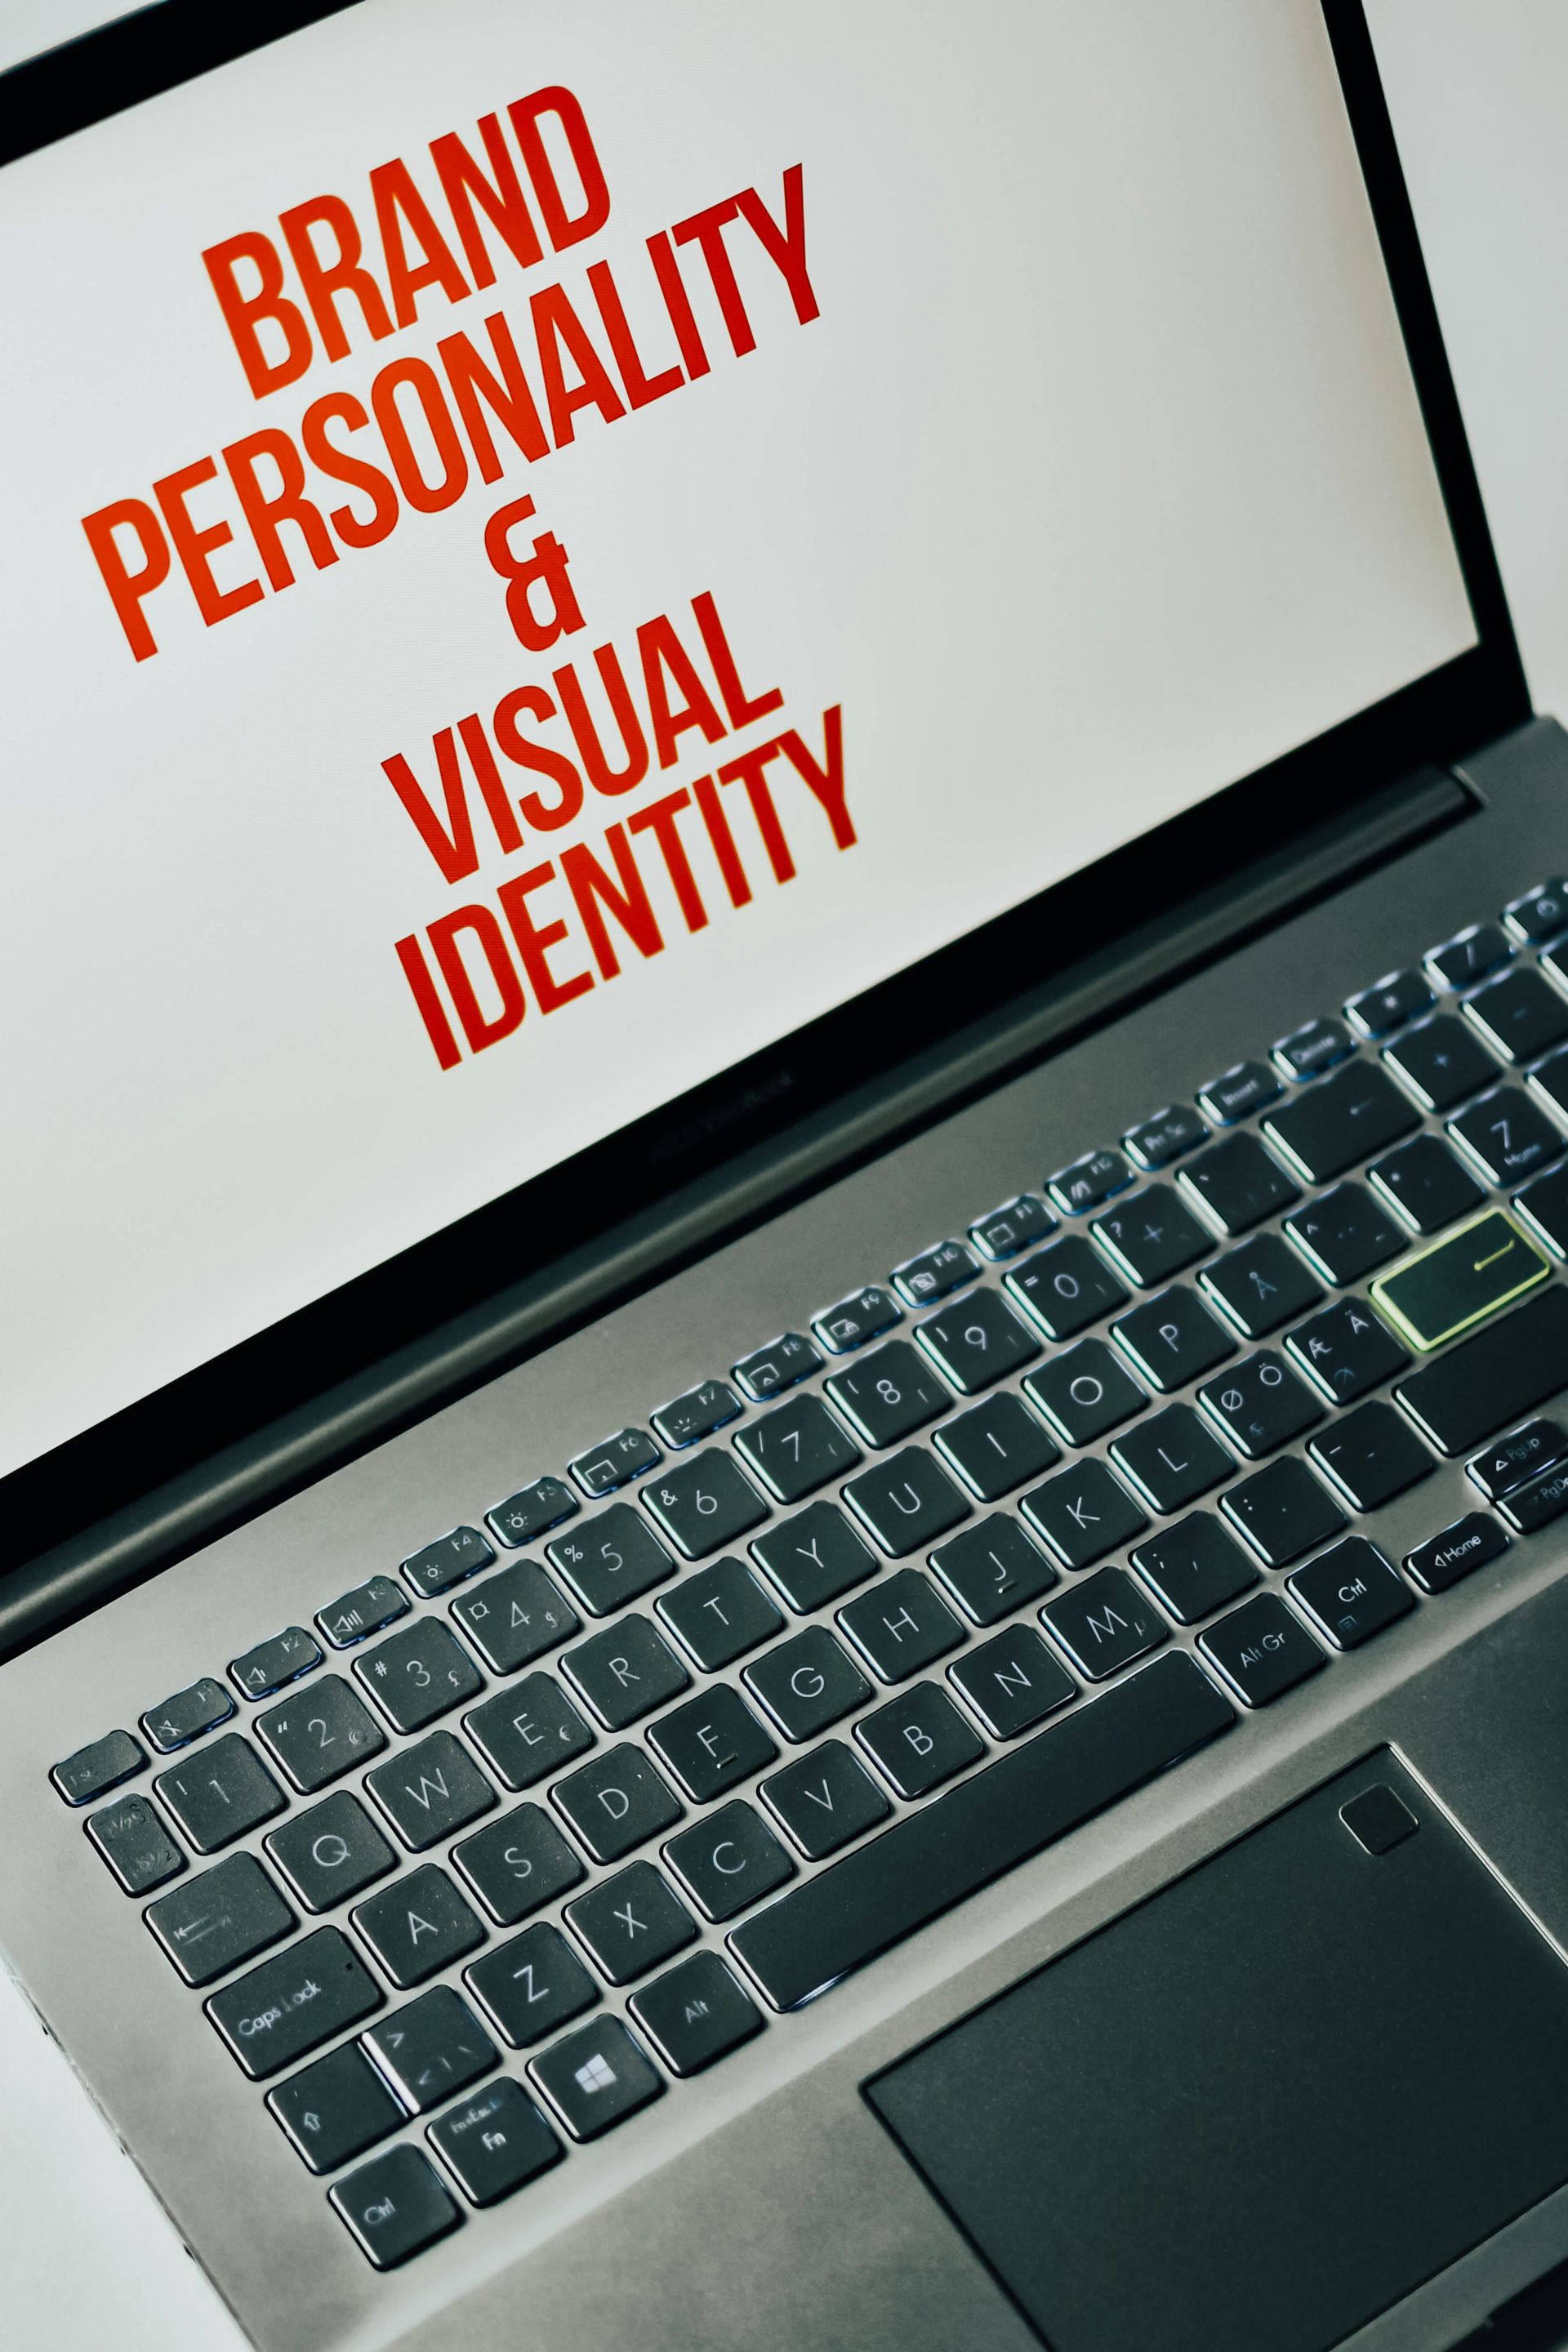 Laptop screen displaying the words "brand personality & visual identity" in red font, with a close-up of the keyboard visible.